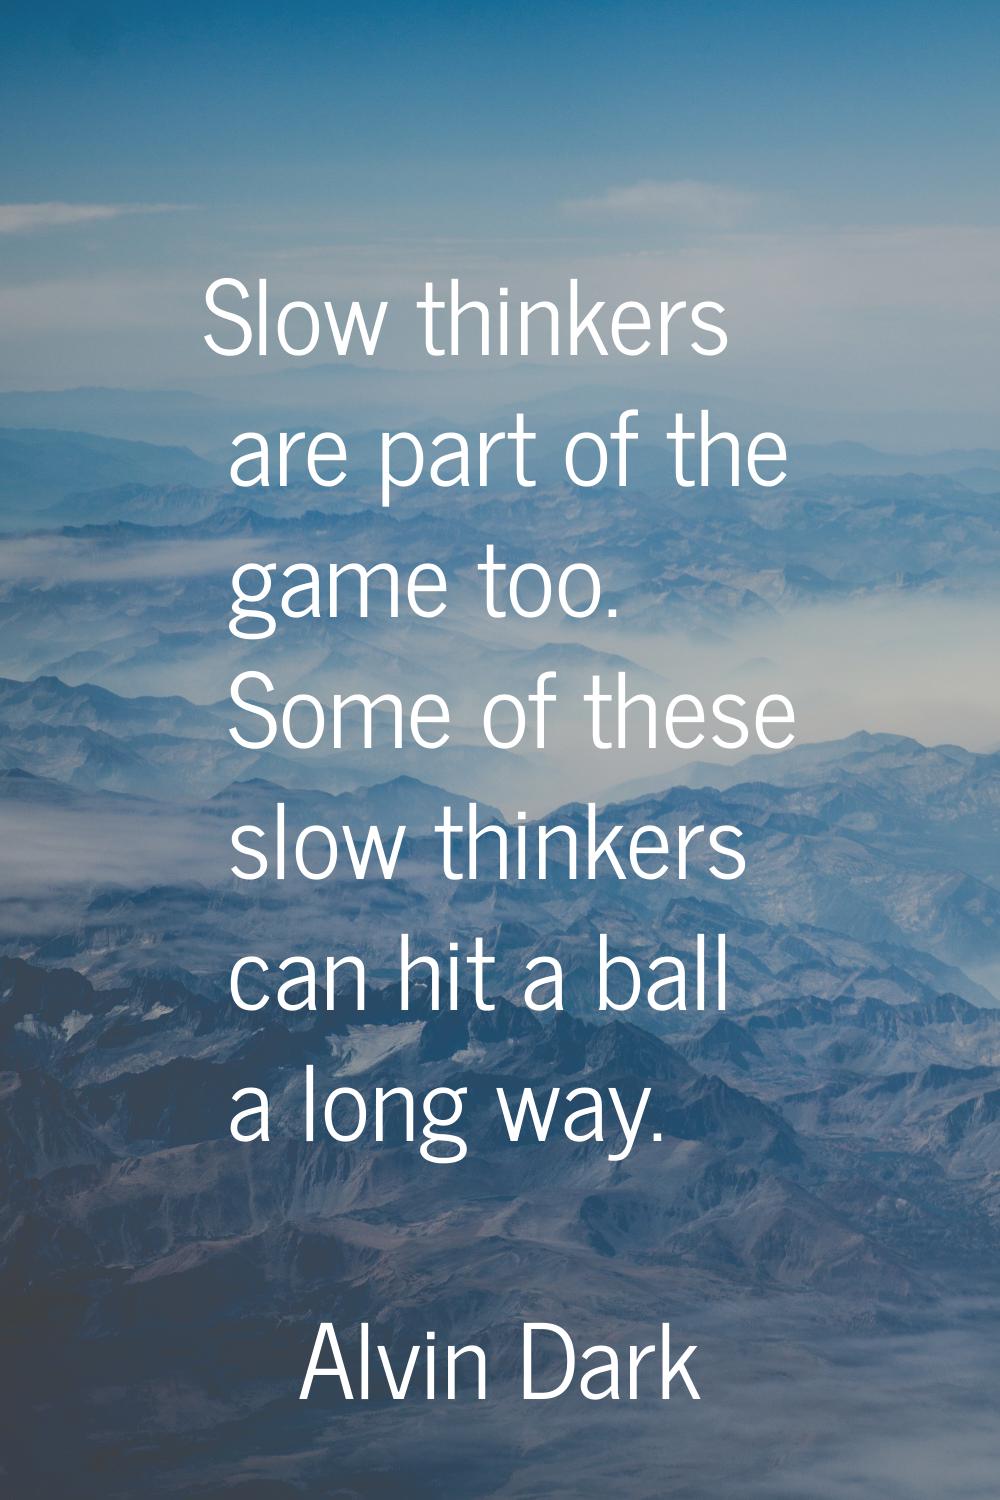 Slow thinkers are part of the game too. Some of these slow thinkers can hit a ball a long way.